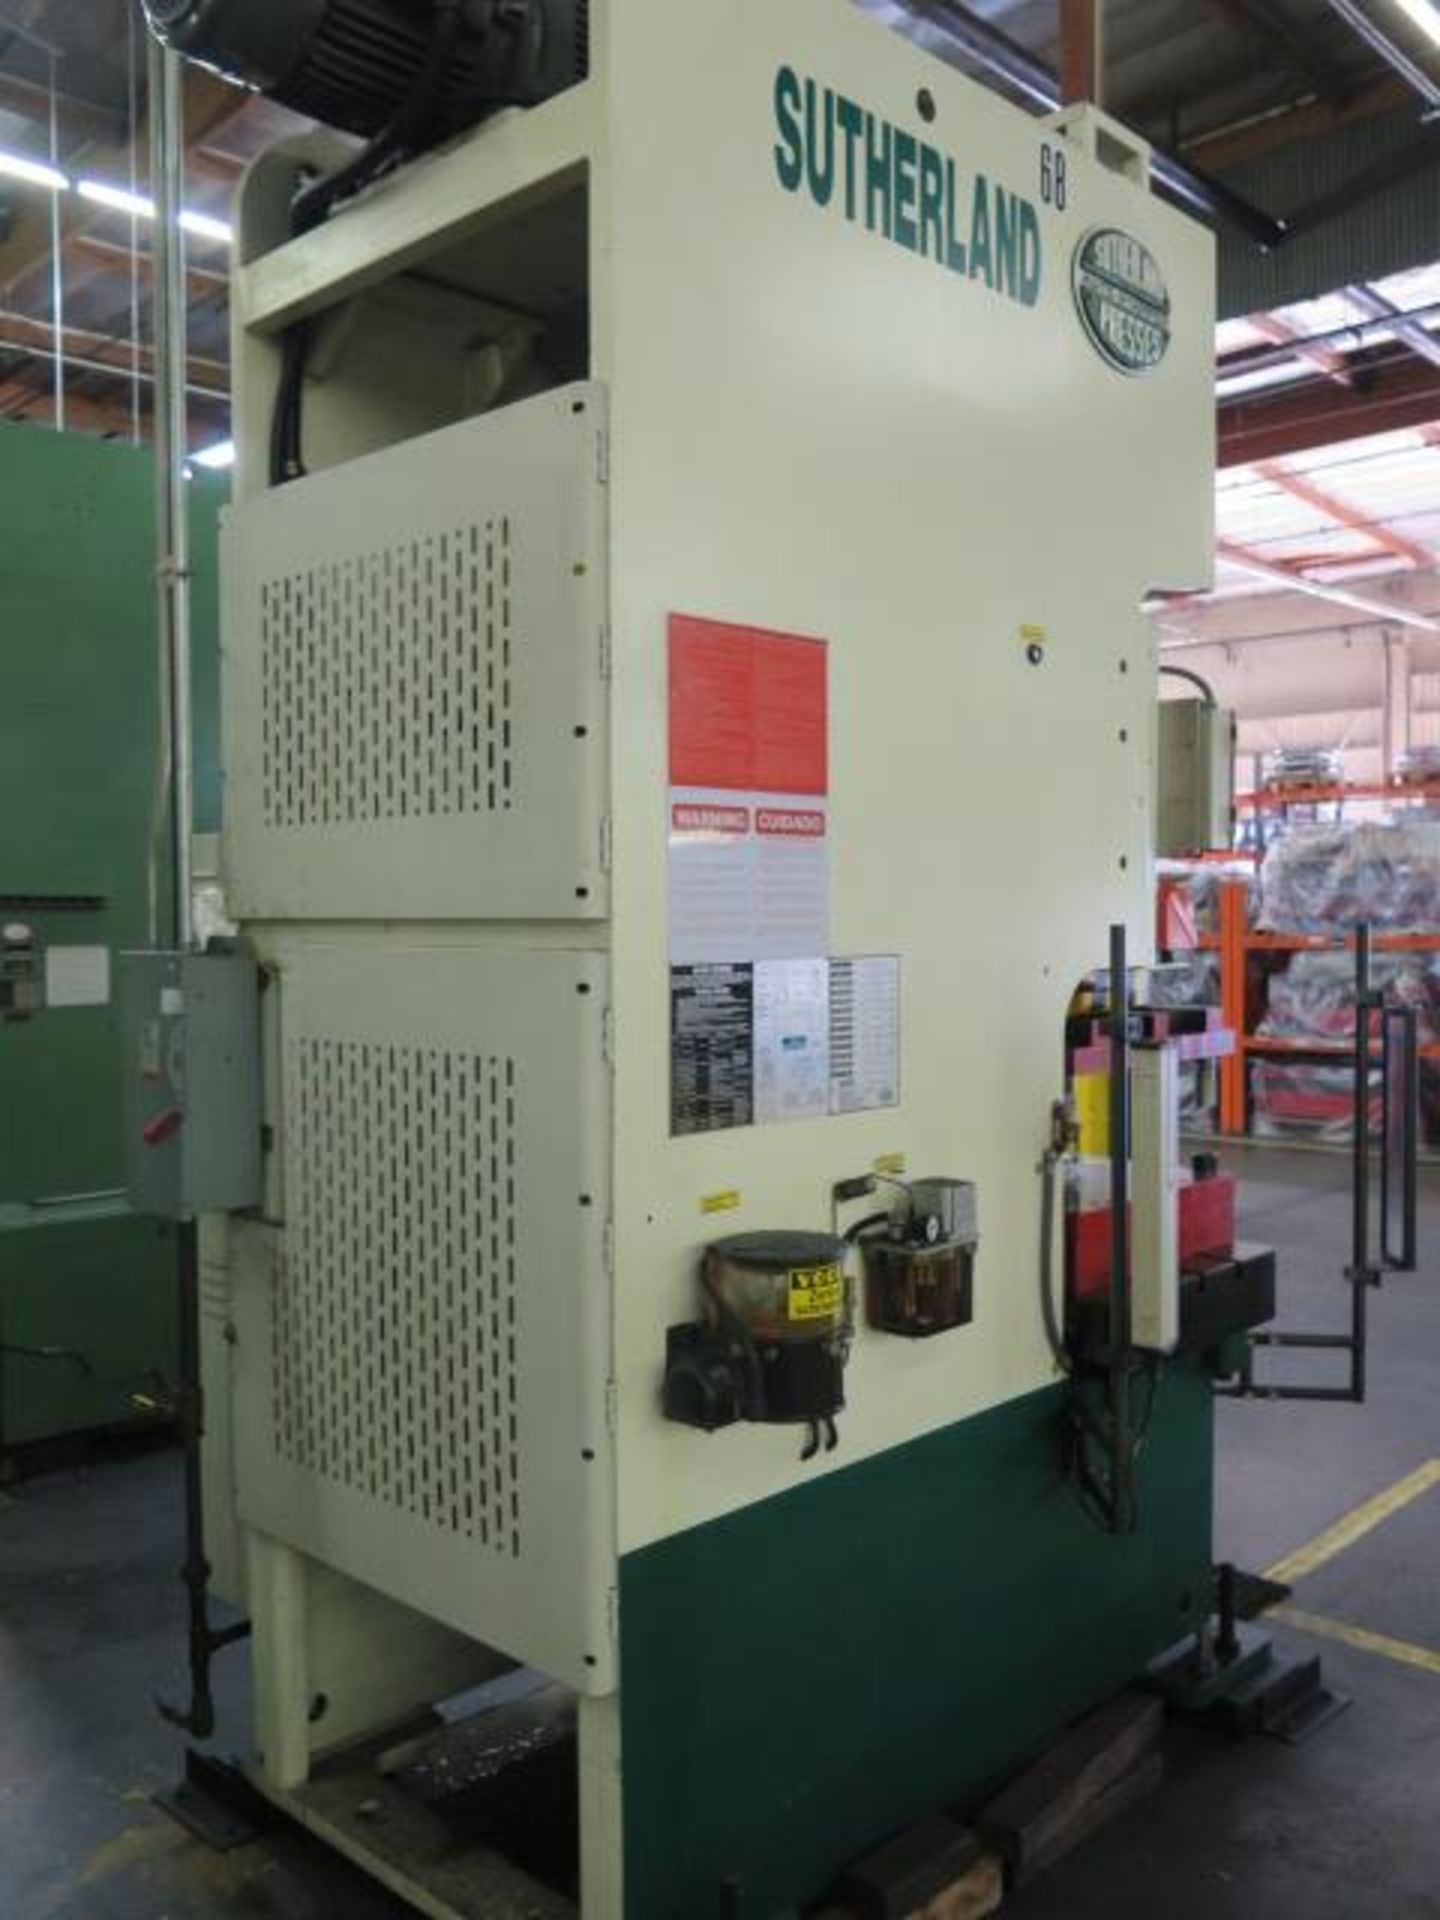 2002 Southerland MARK-121 121 Ton Gap Frame Punch Press s/n 10201101009 Wintress Control, SOLD AS IS - Image 13 of 18